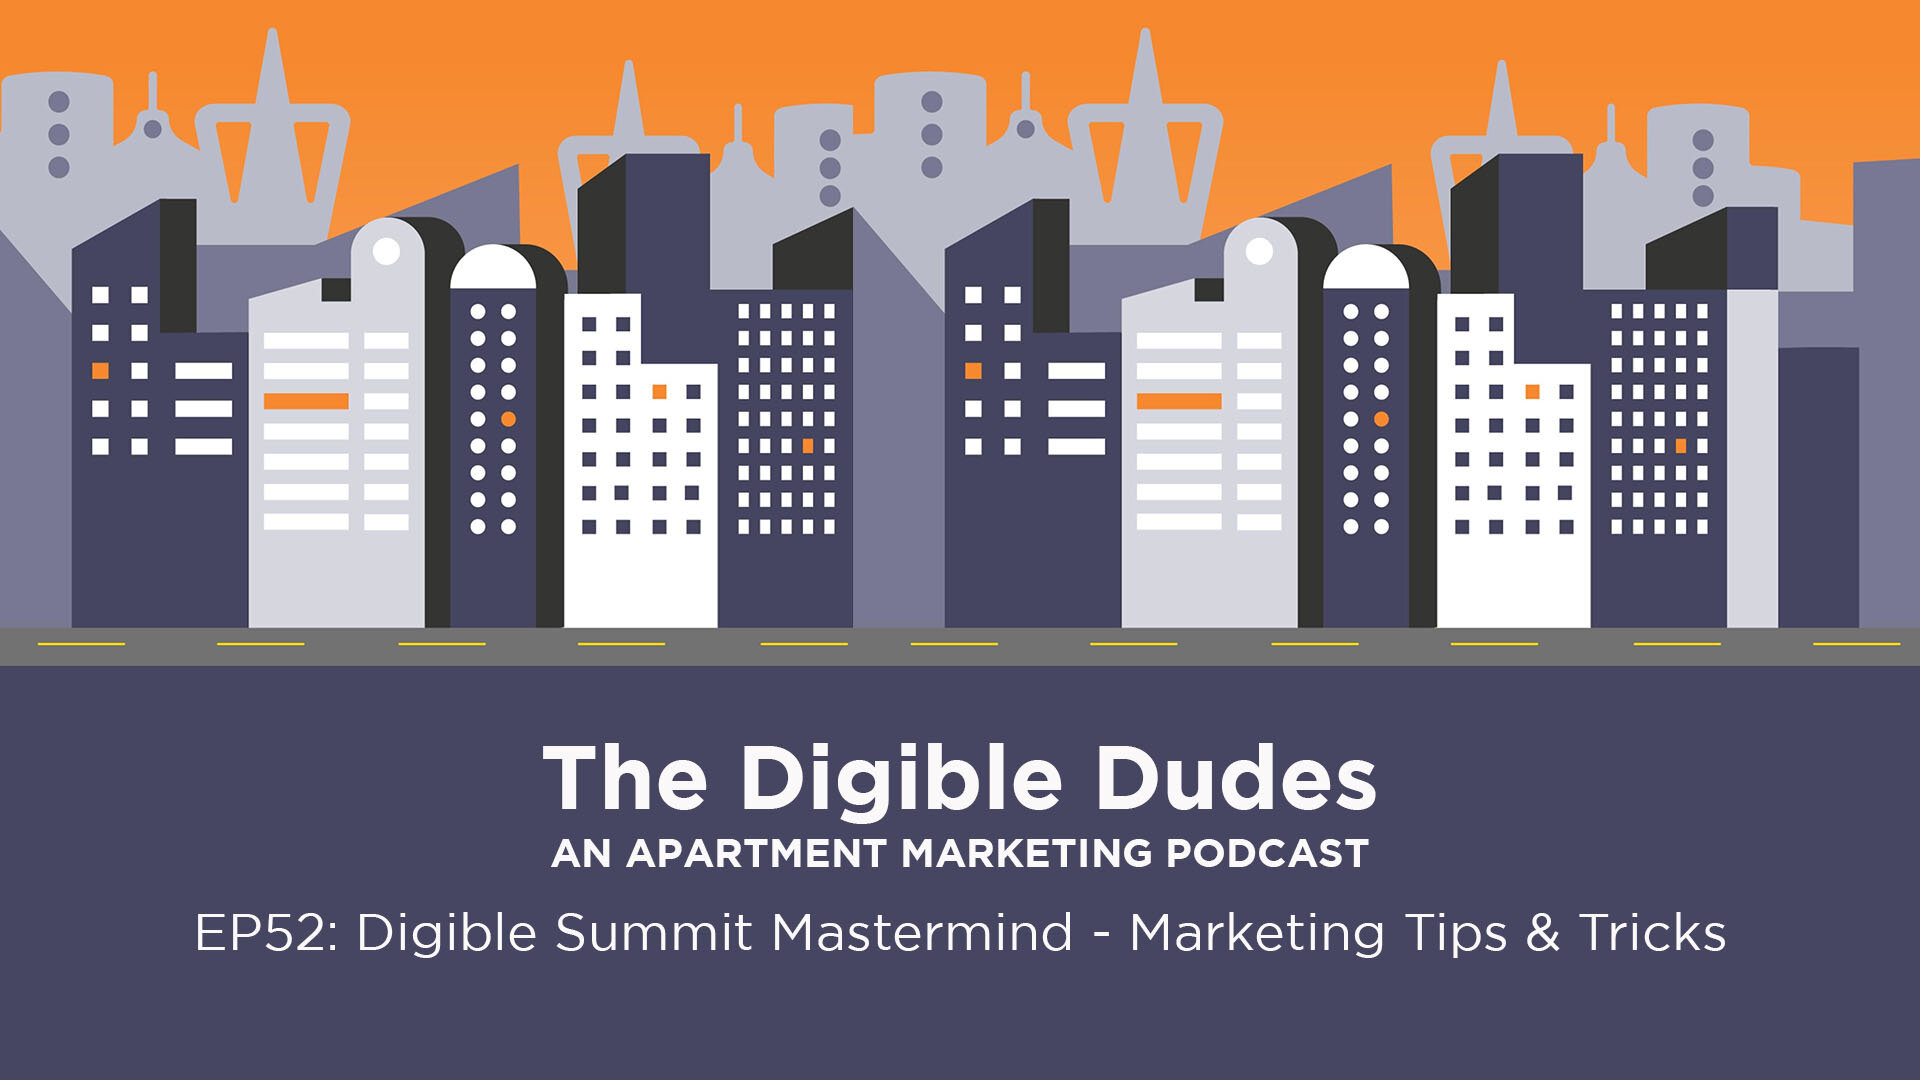 Podcast E52 - Digible Summit Mastermind - Marketing Tips & Tricks